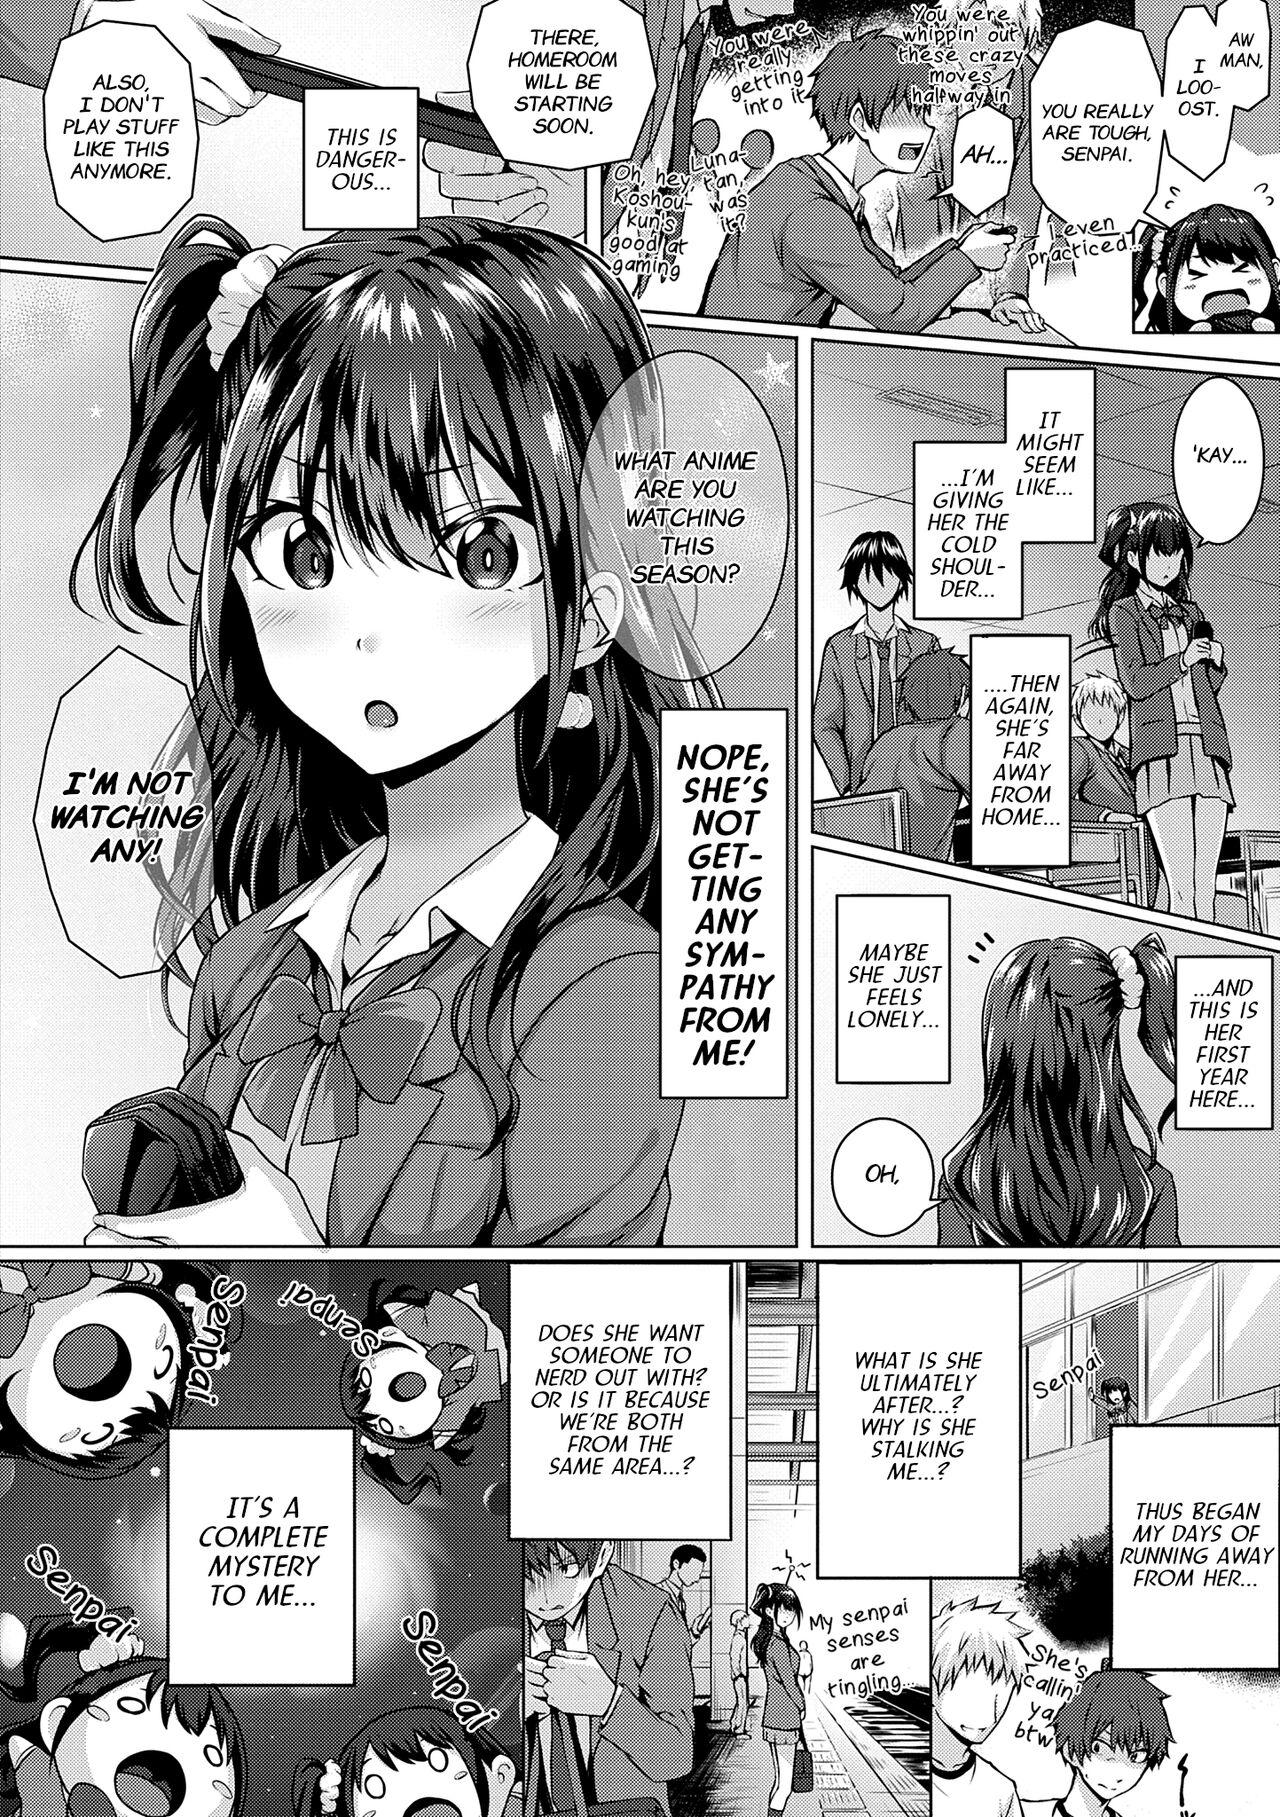 Selfie Flag Kaishuu wa Totsuzen ni | The Puzzle Pieces Are Suddenly Coming Together Amatuer - Page 4